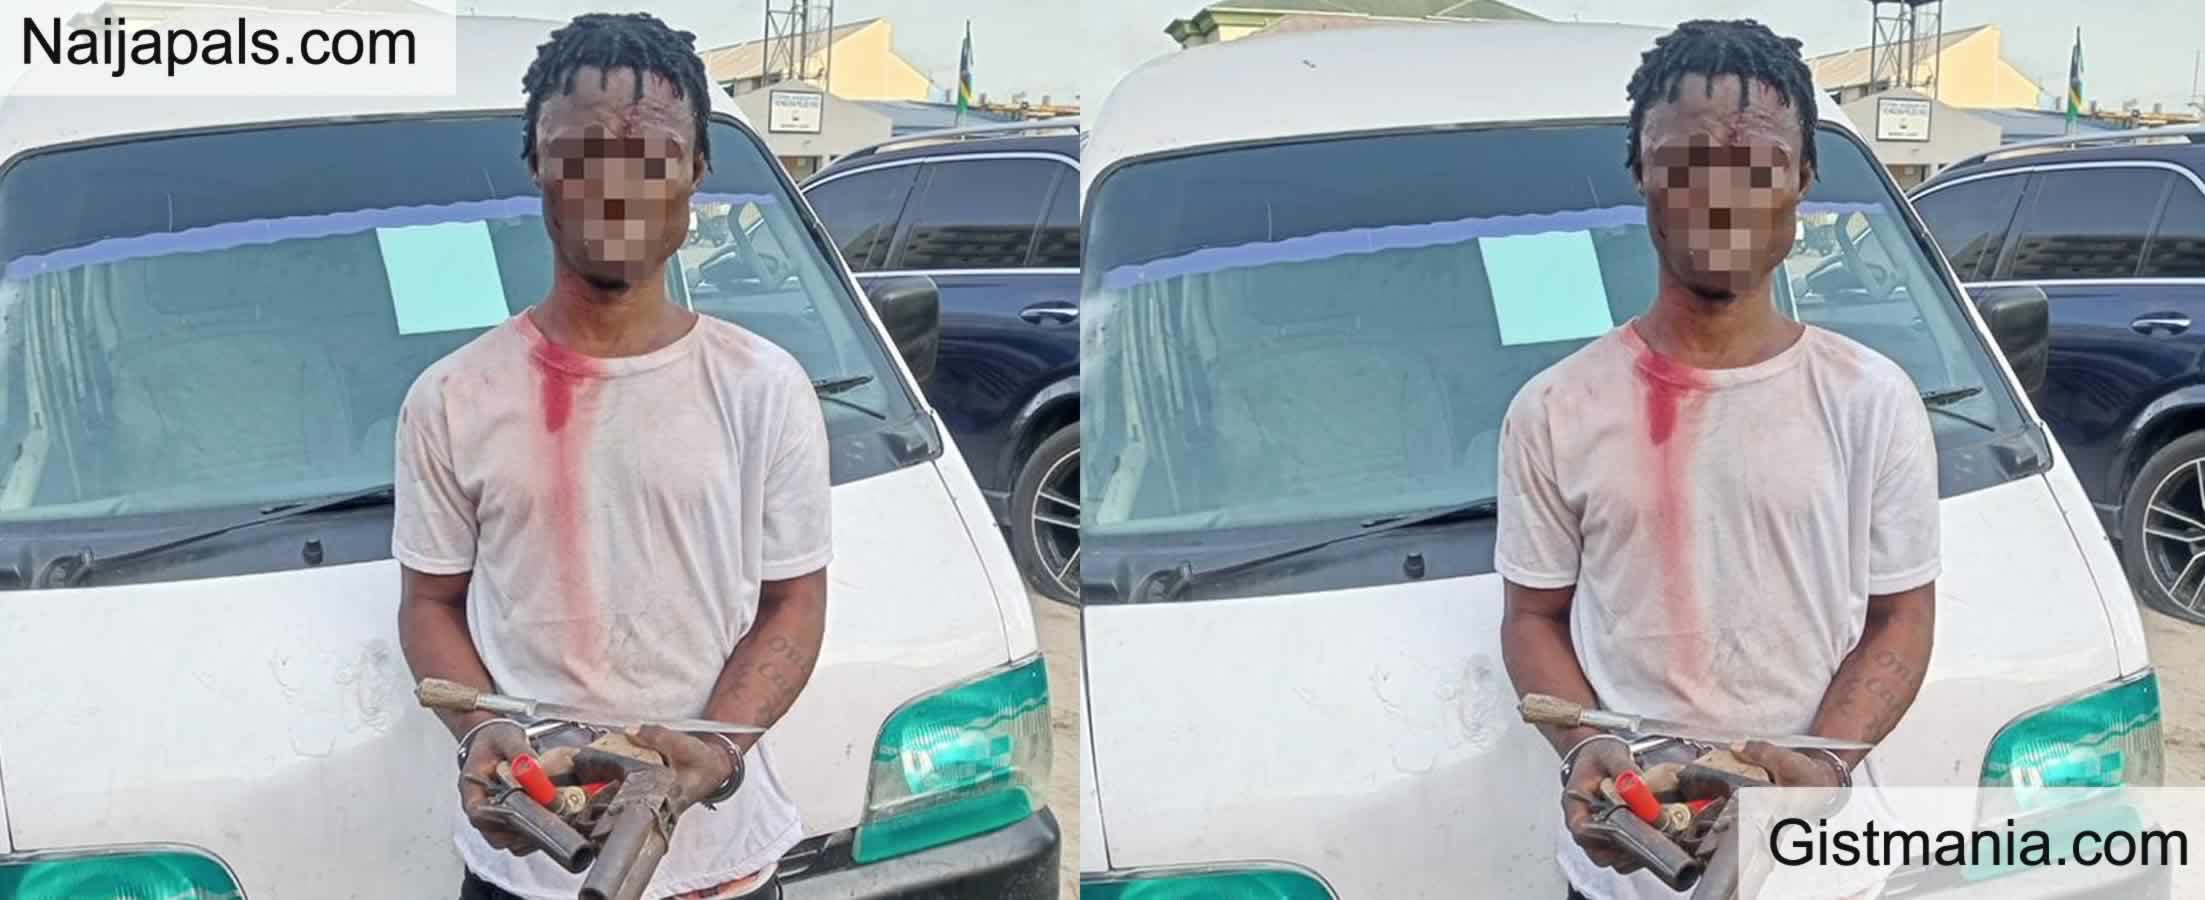 PHOTOS: Lagos Driver, Azeez Babatunde Arrested With Dangerous Weapons